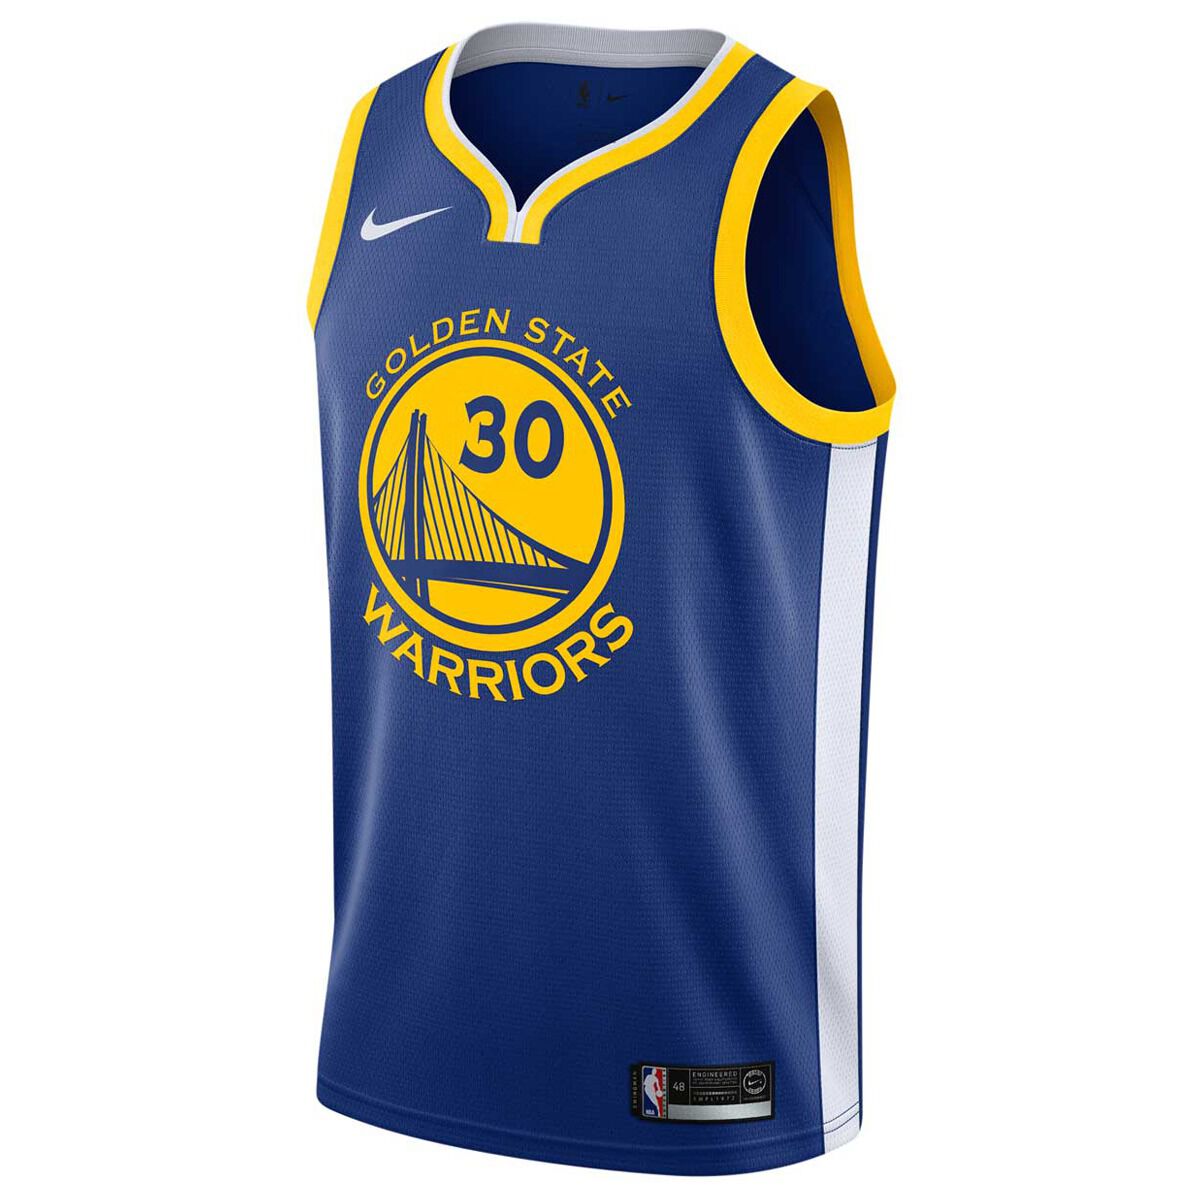 stephen curry jersey youth small